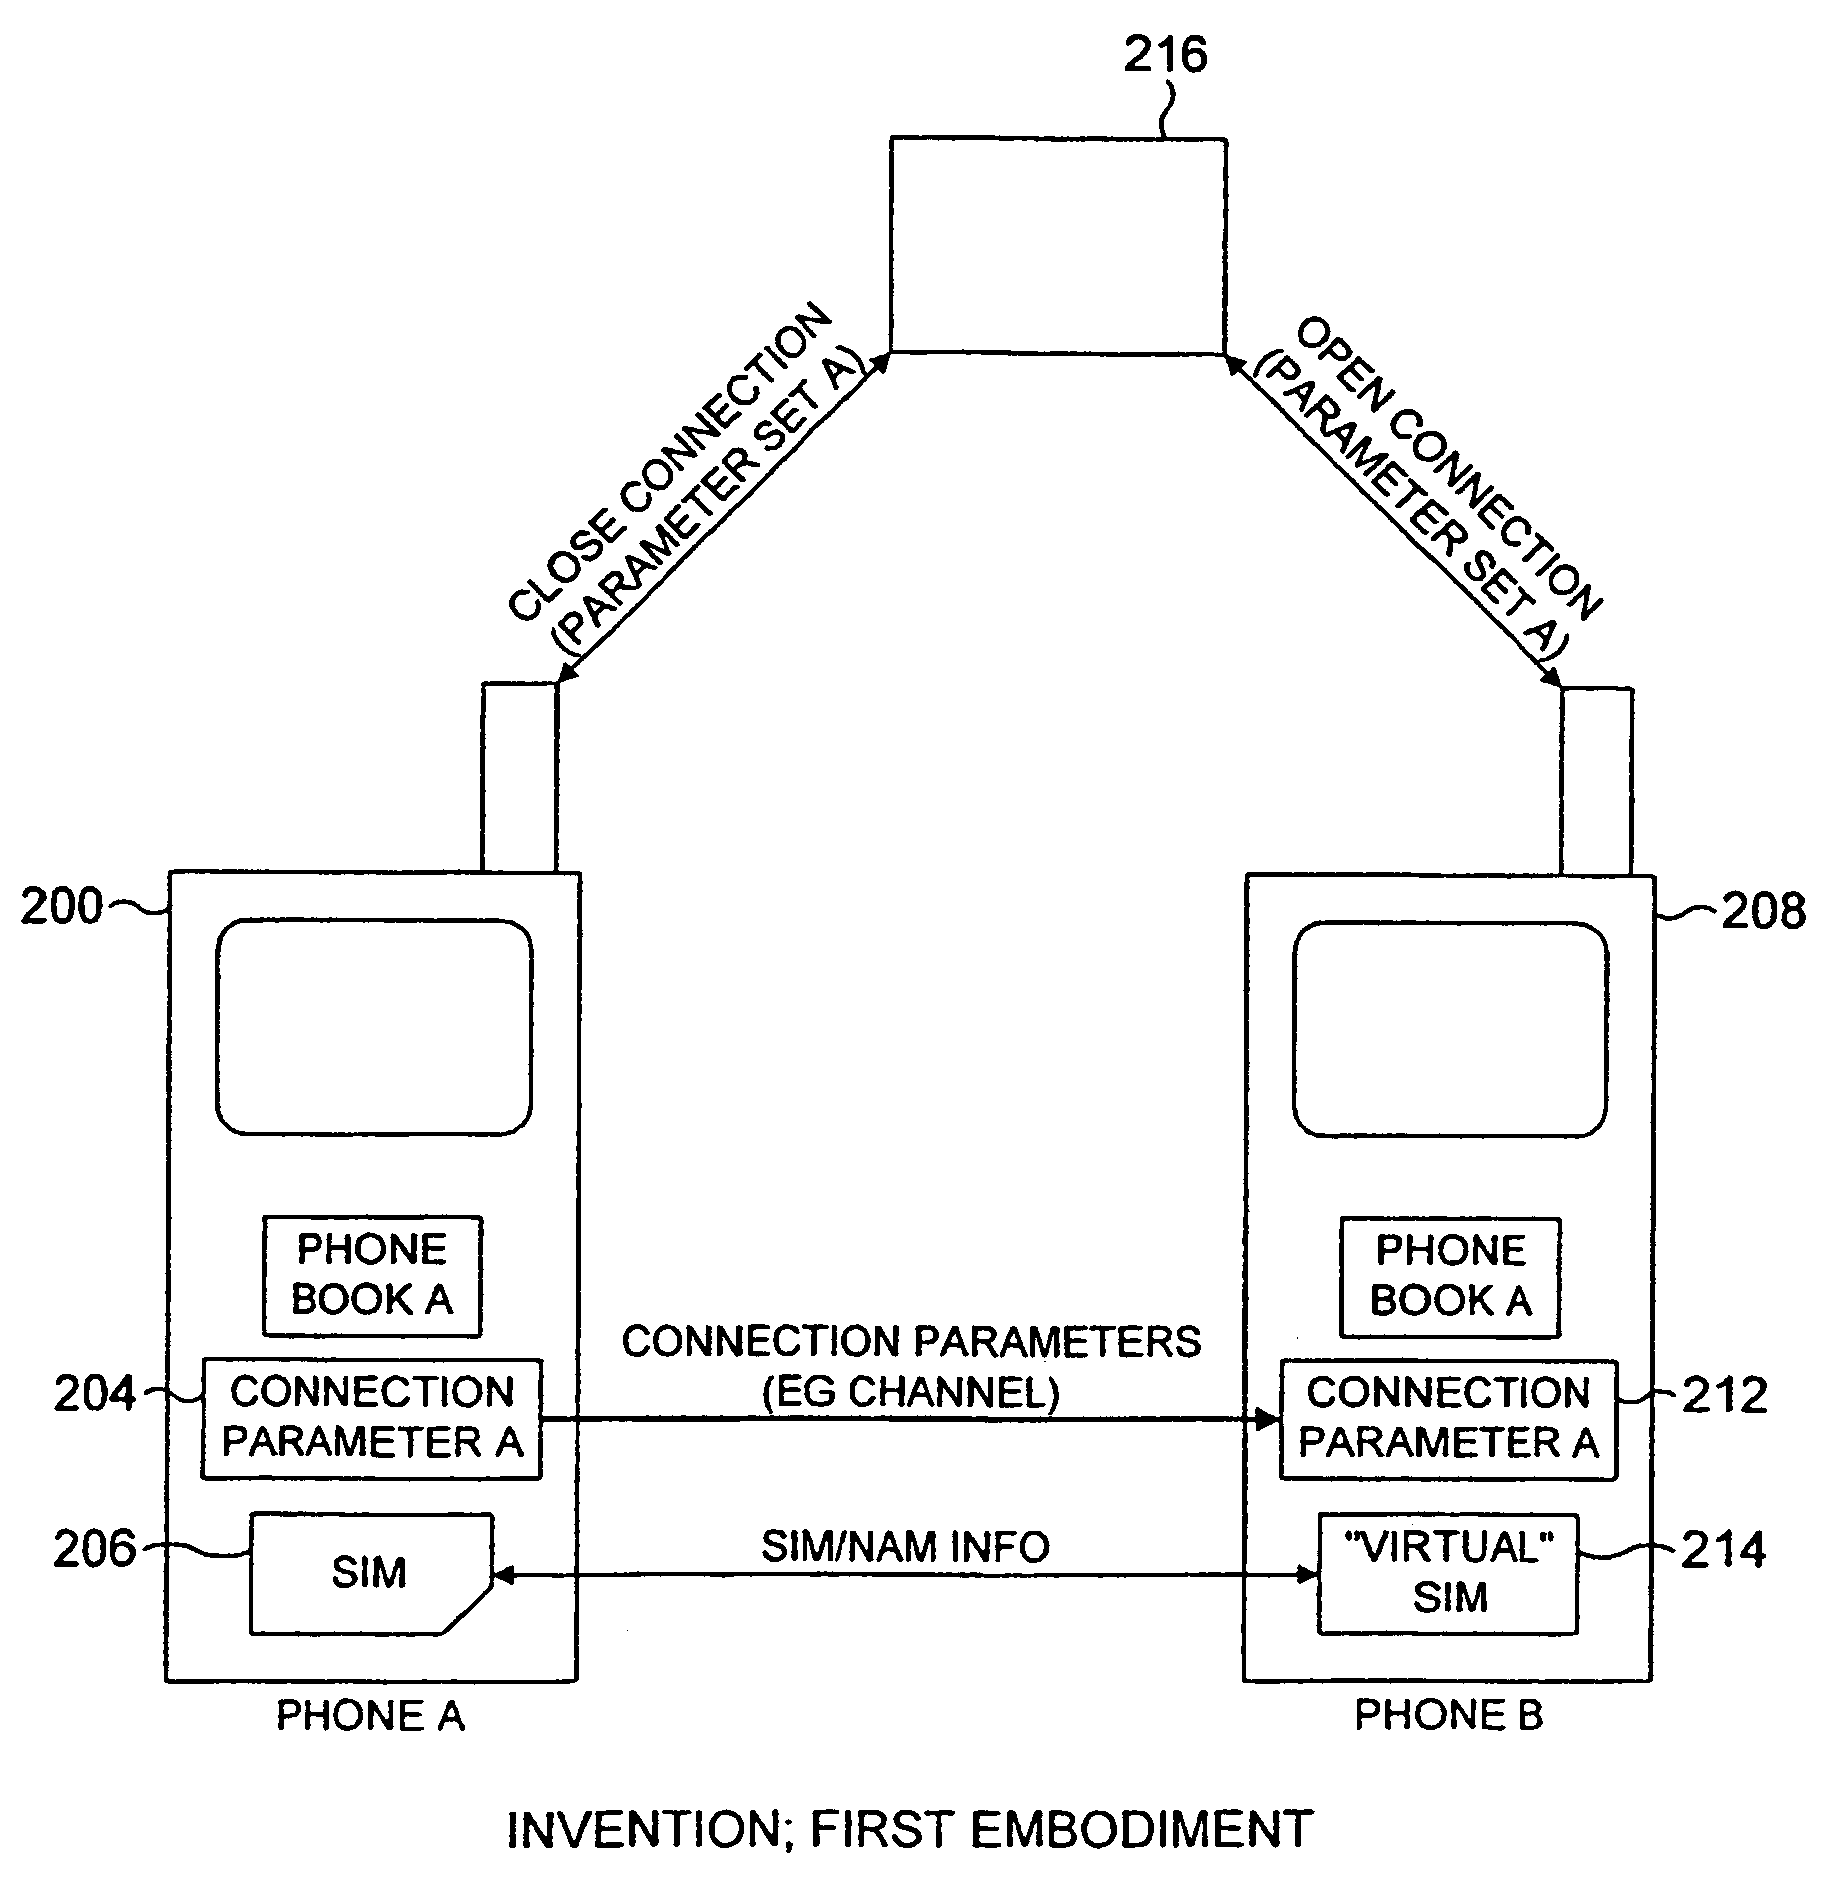 Radio telephone system allowing exchange of call setup parameters between associated or commonly owned mobile devices